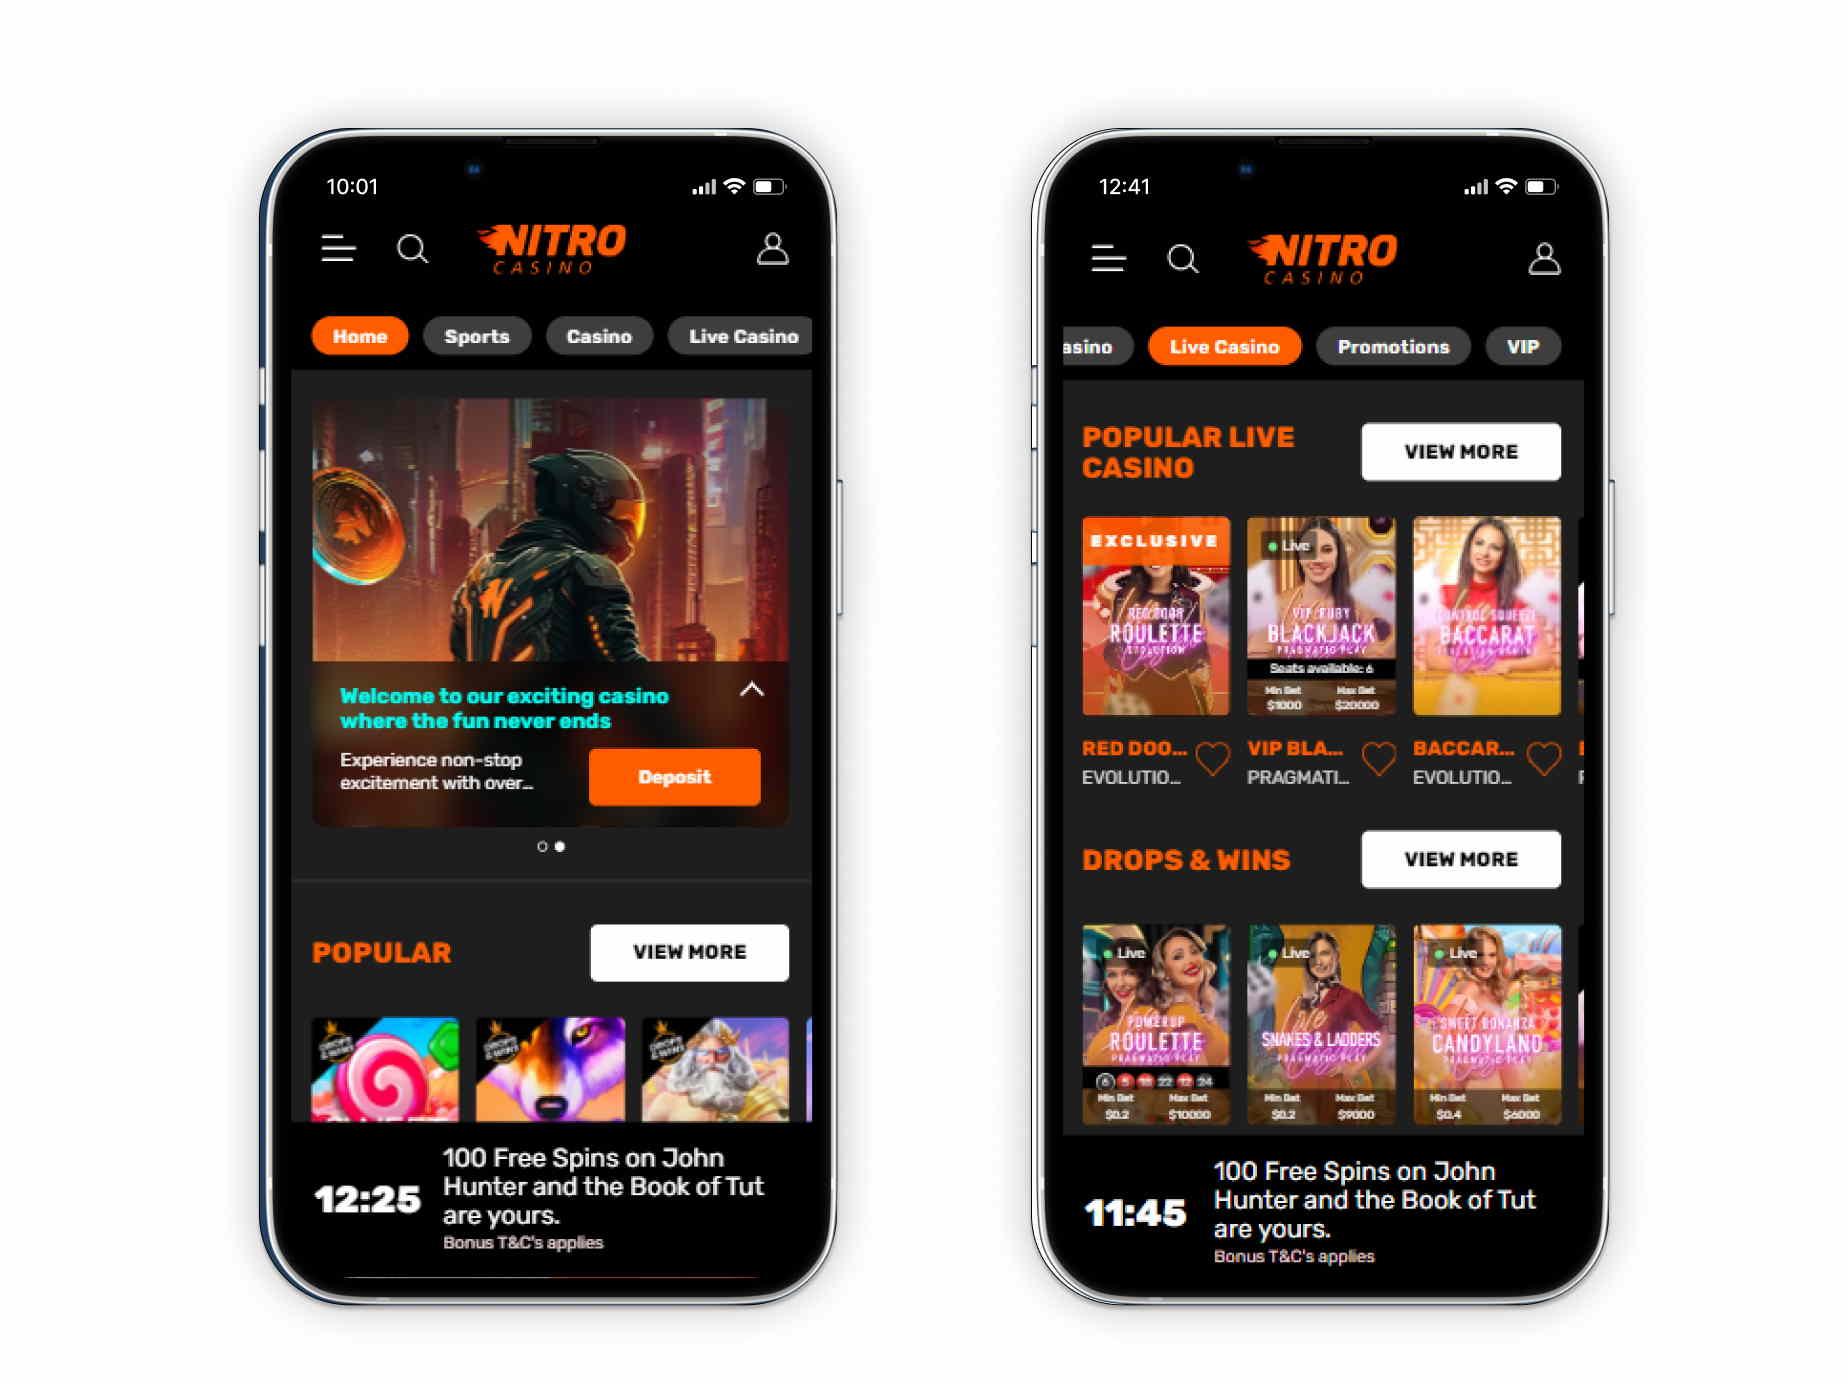 Nitro Casino's landing page and live casino lobby in a mobile viewport